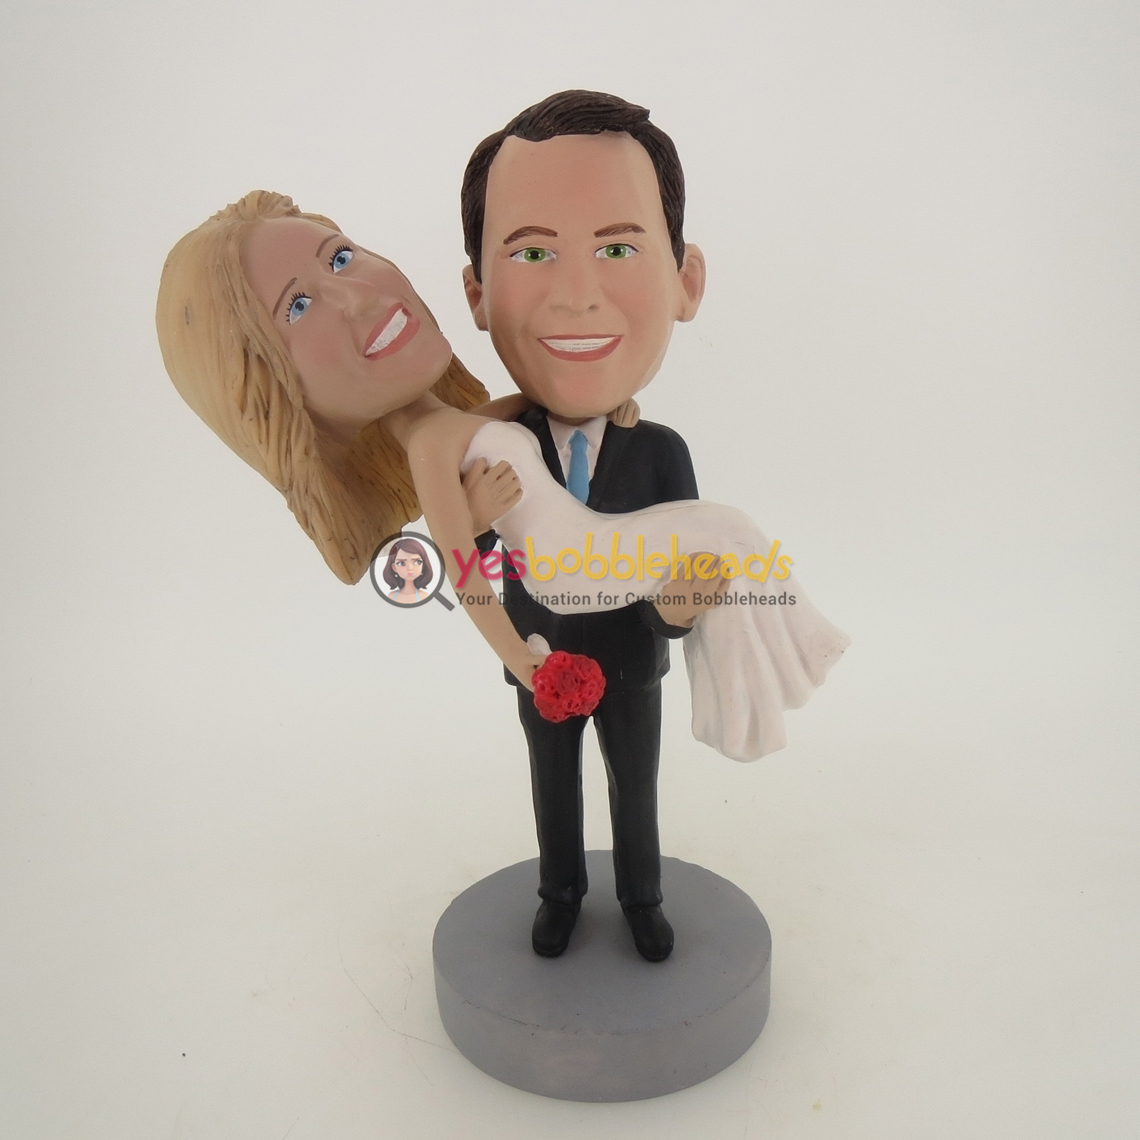 Picture of Custom Bobblehead Doll: Groom Holding Bride Happily